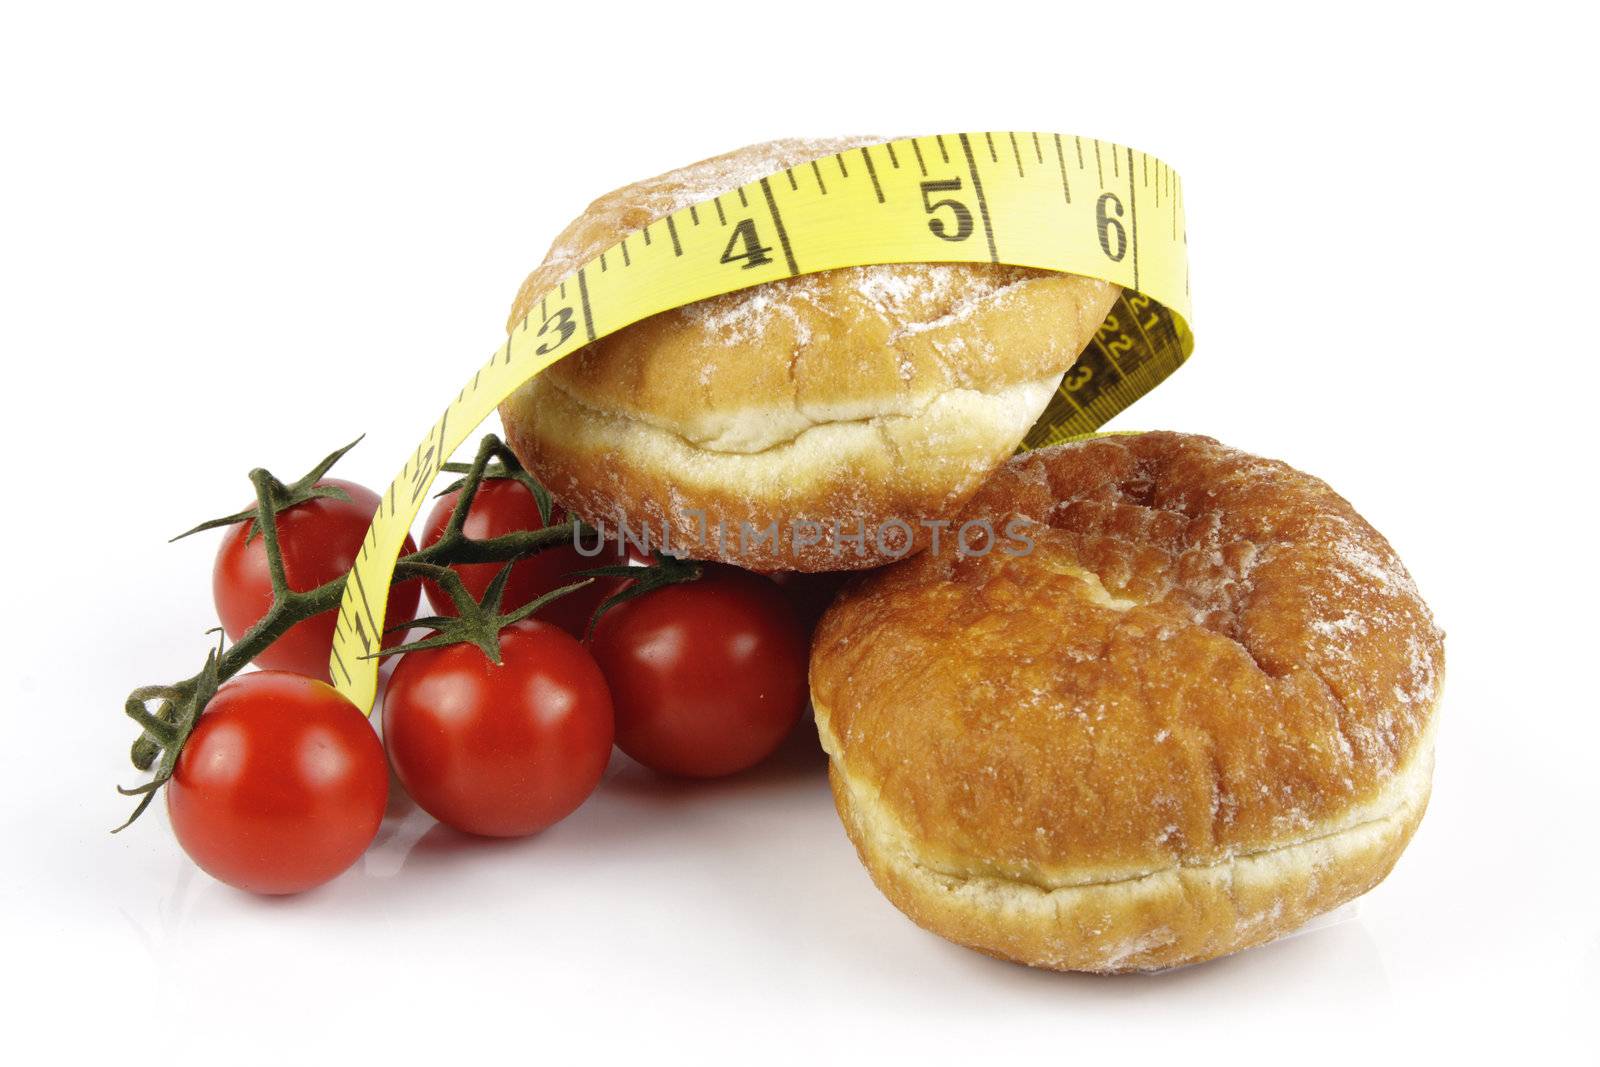 Contradiction between healthy food and junk food using red ripe tomatoes and doughnuts with a yellow tape measure on a reflective white background 